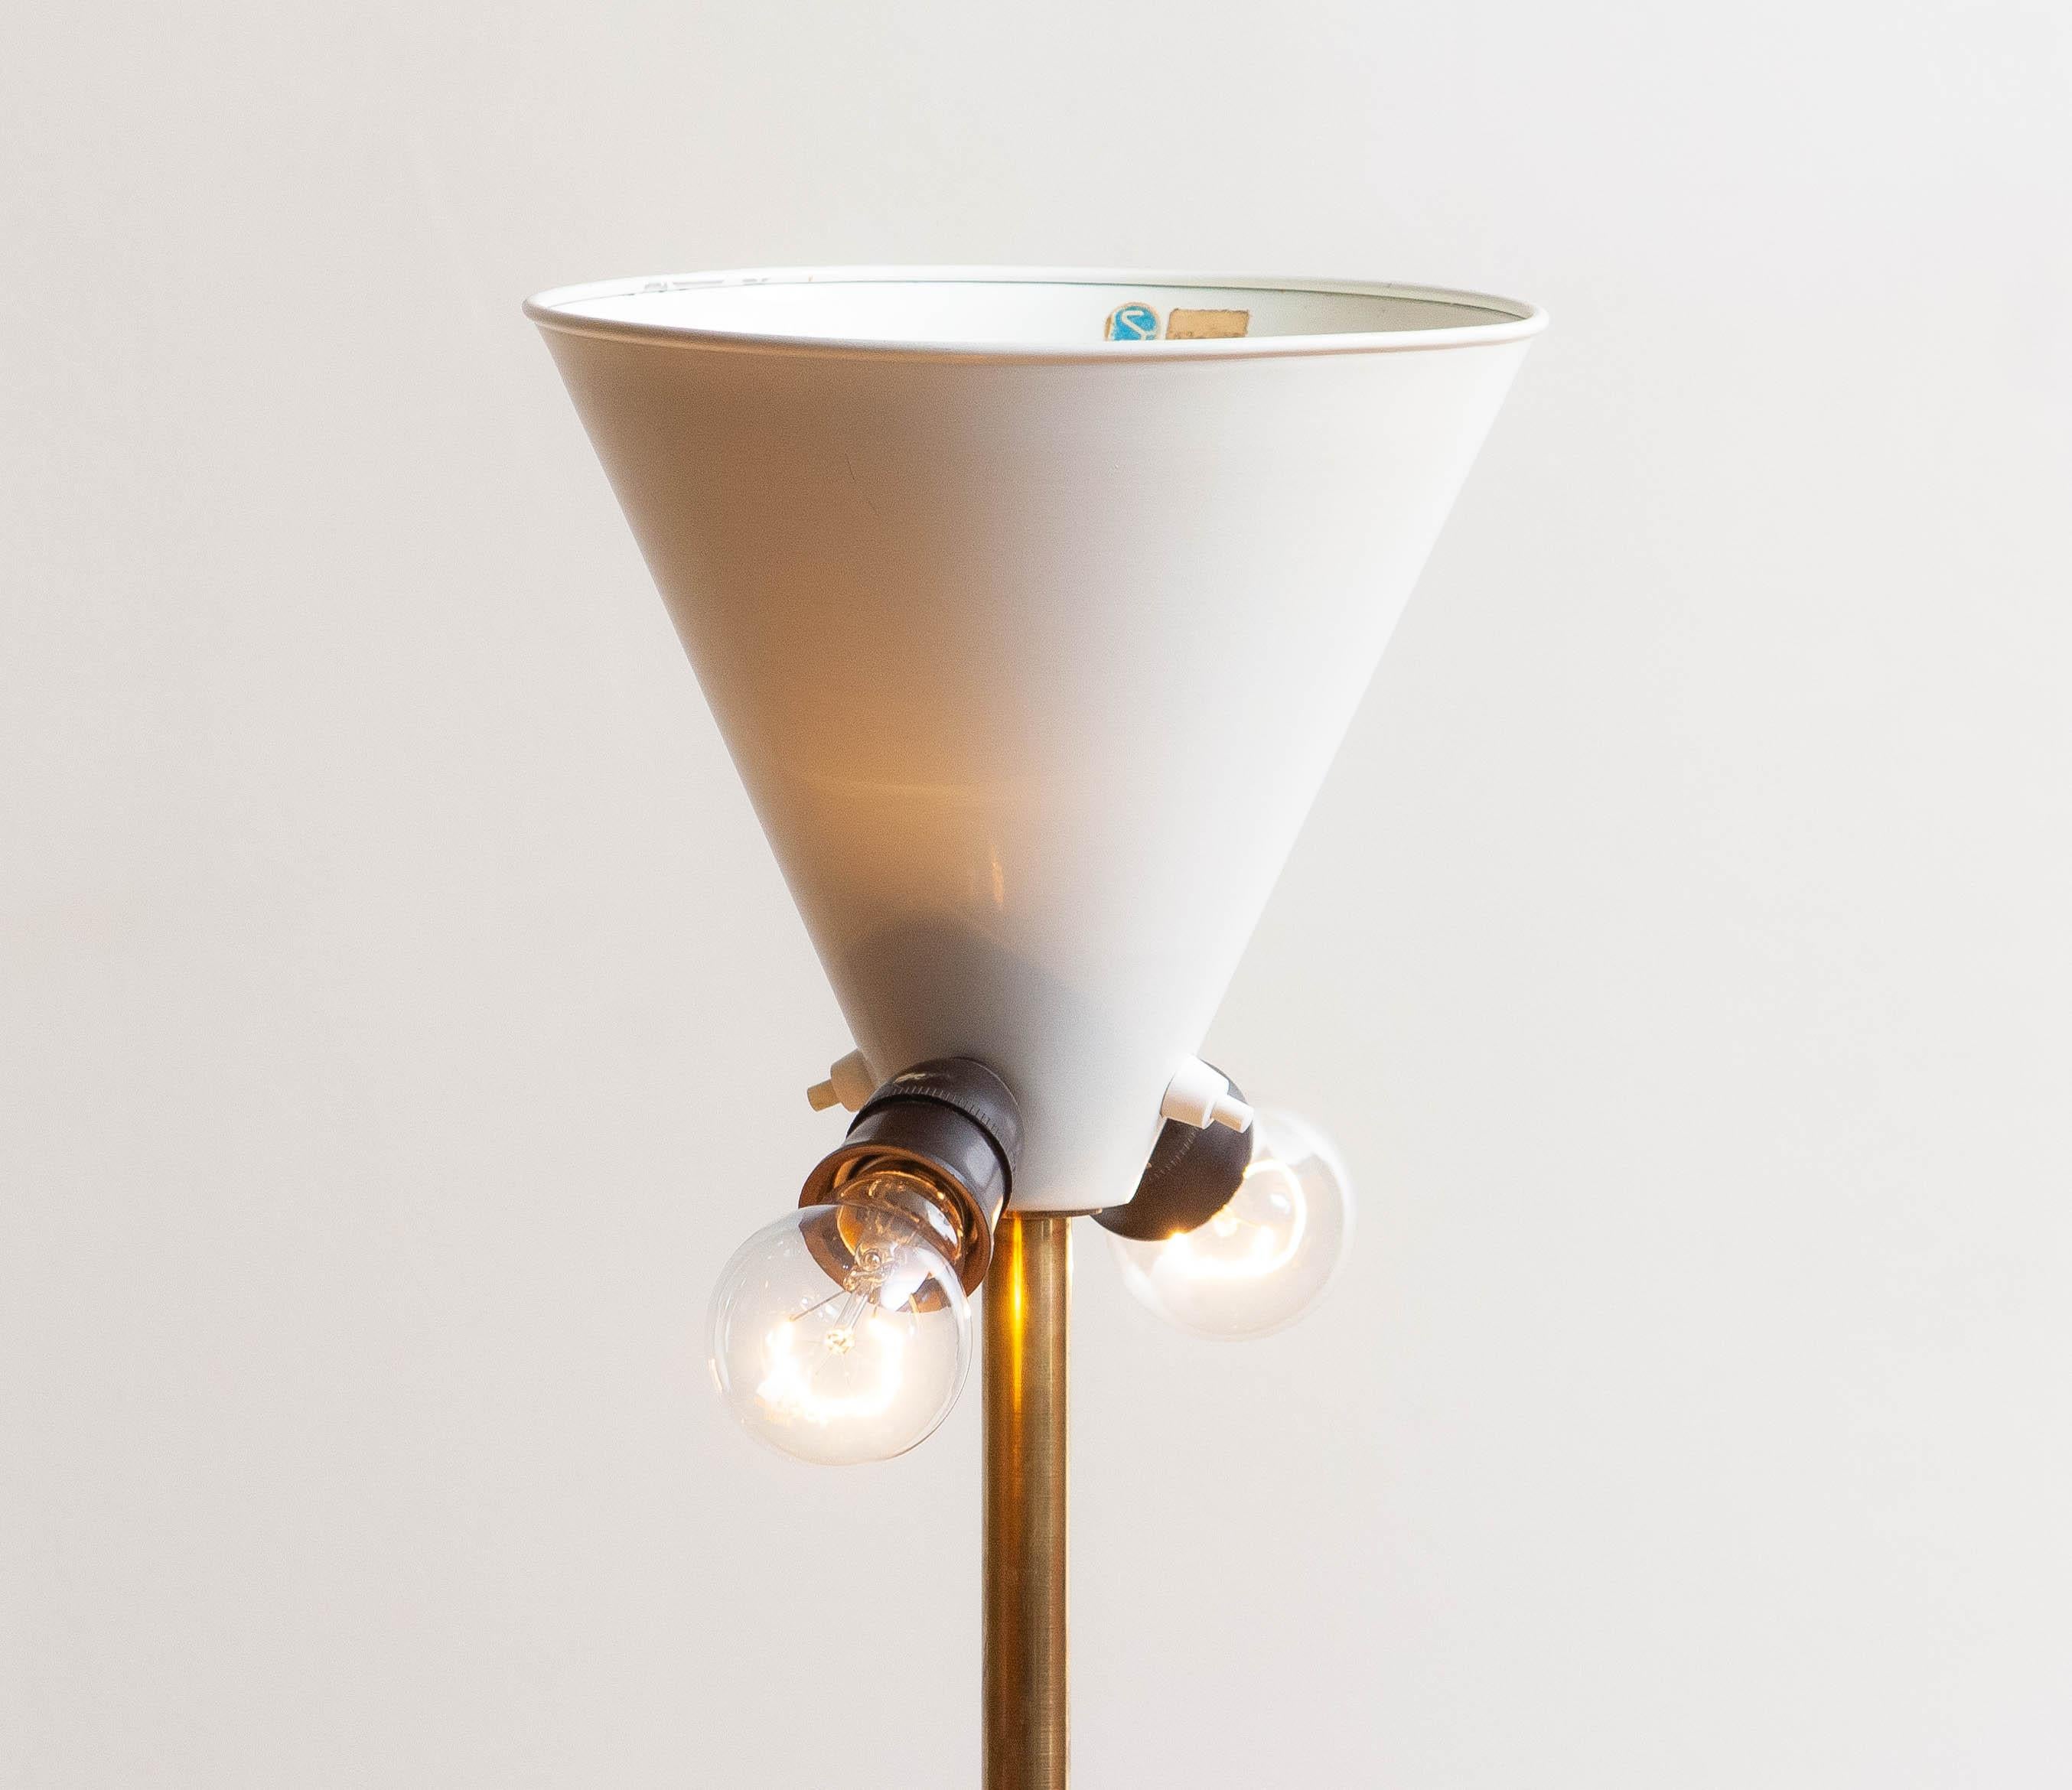 1950s, Up-Light Floor Lamp in Brass and Metal by Fagerhults Belysning, Sweden 1